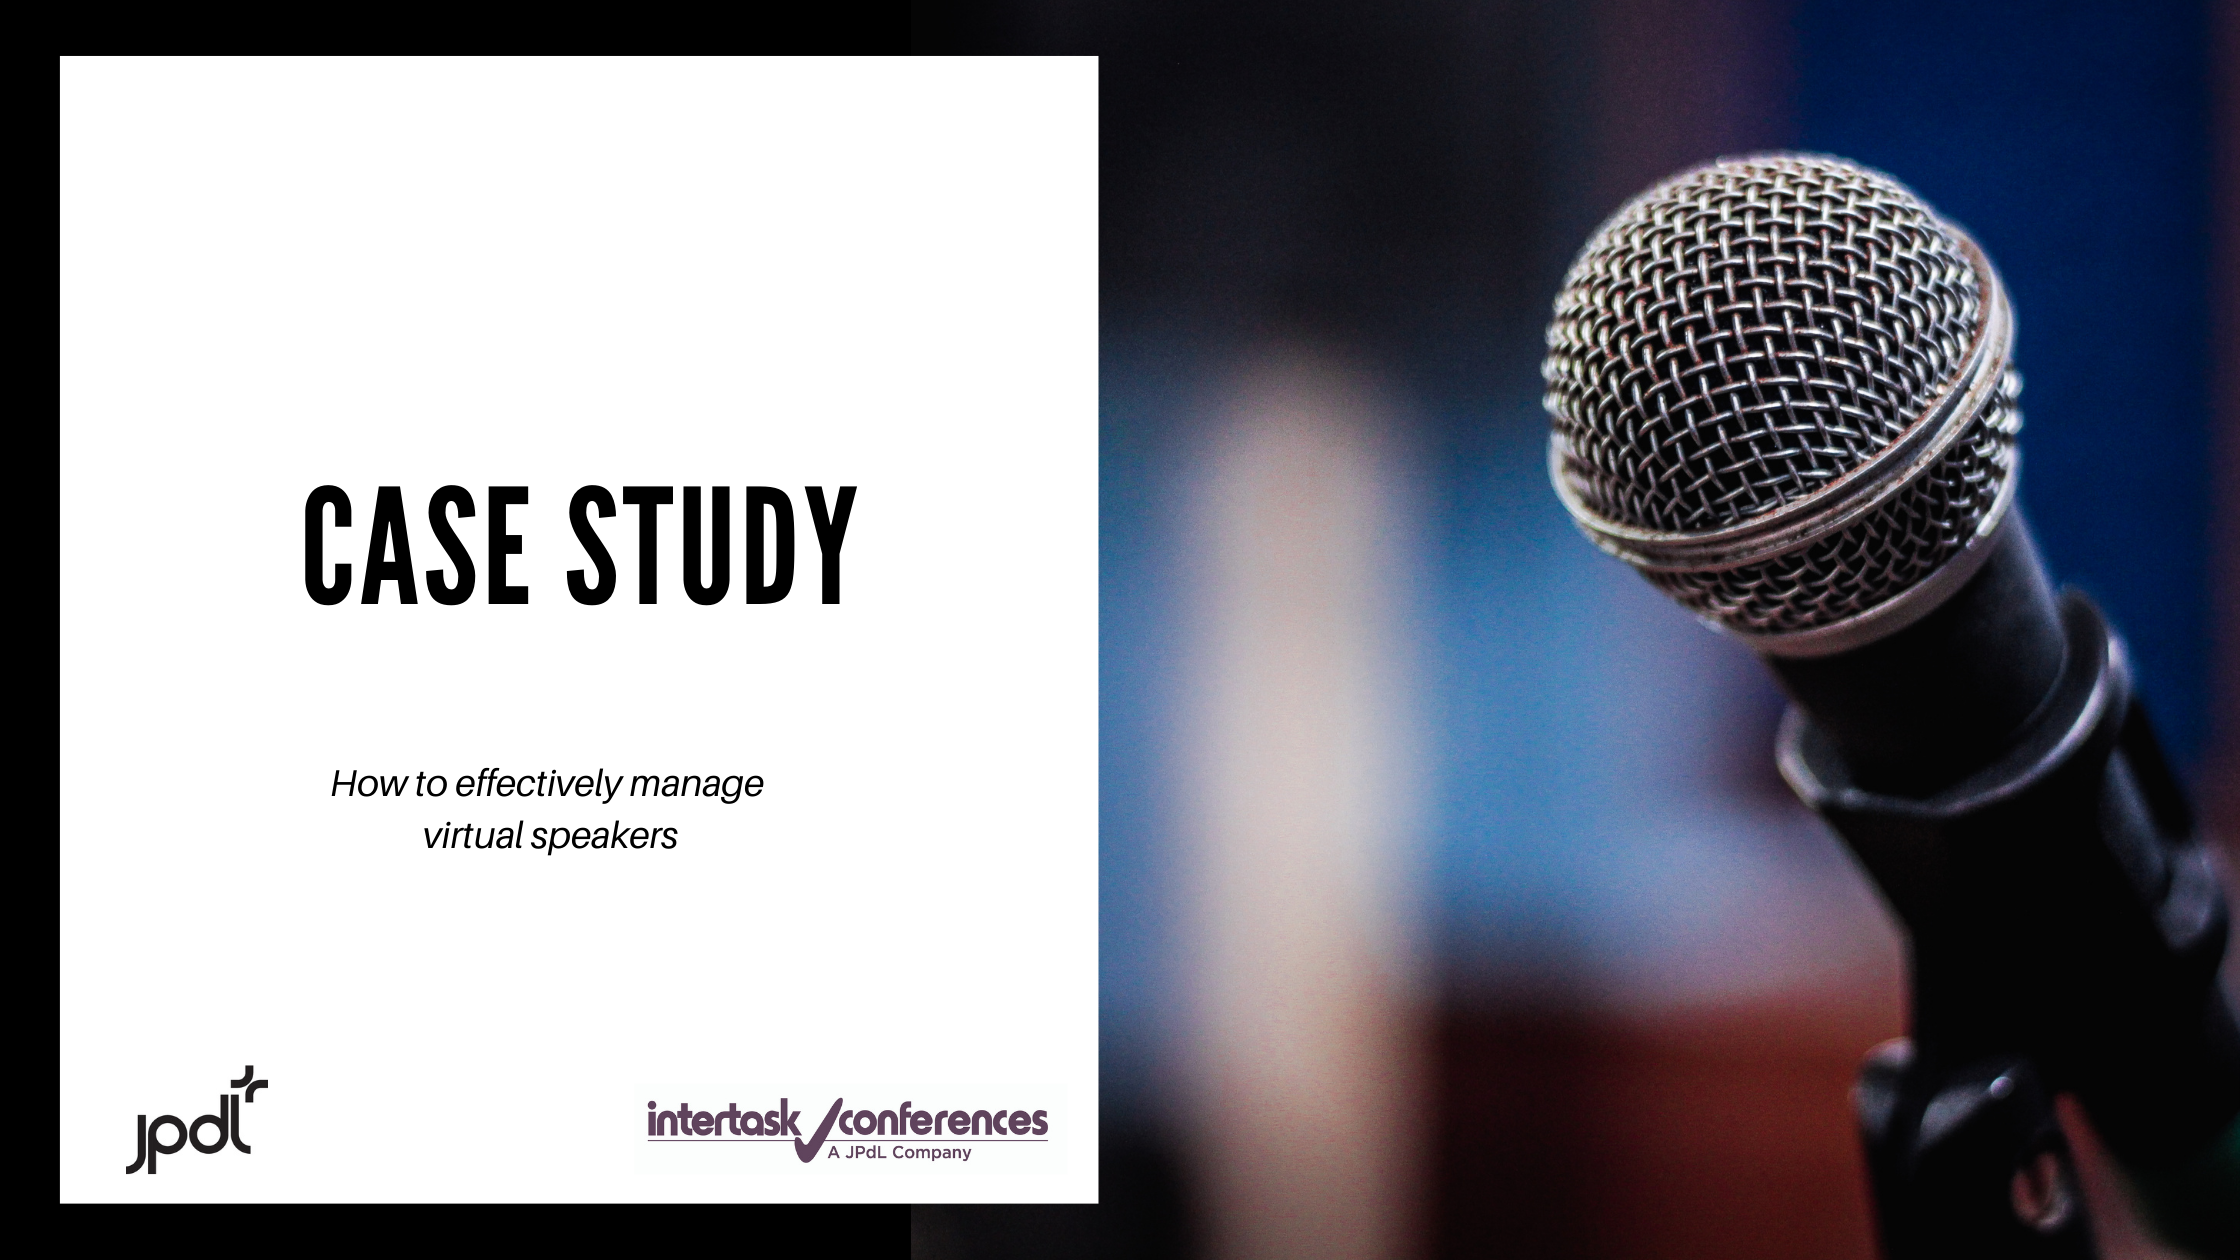 Case Study: How to Effectively Manage Virtual Speakers?